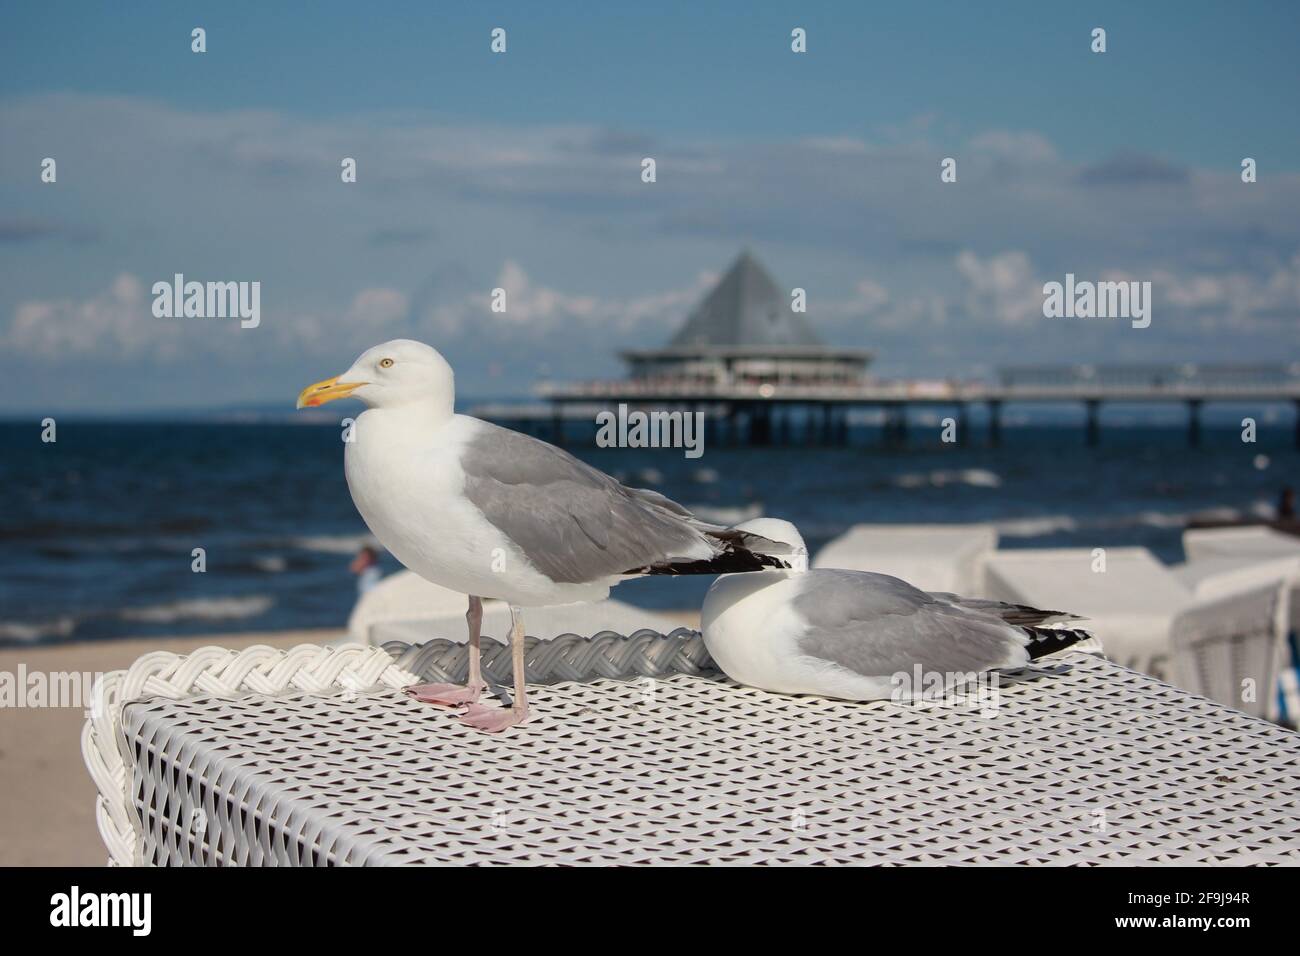 A Pair of Herring Gulls (Larus argentatus) sunbathing on the roof of a beach chair at Heringsdorf, Usedom, Germany Stock Photo